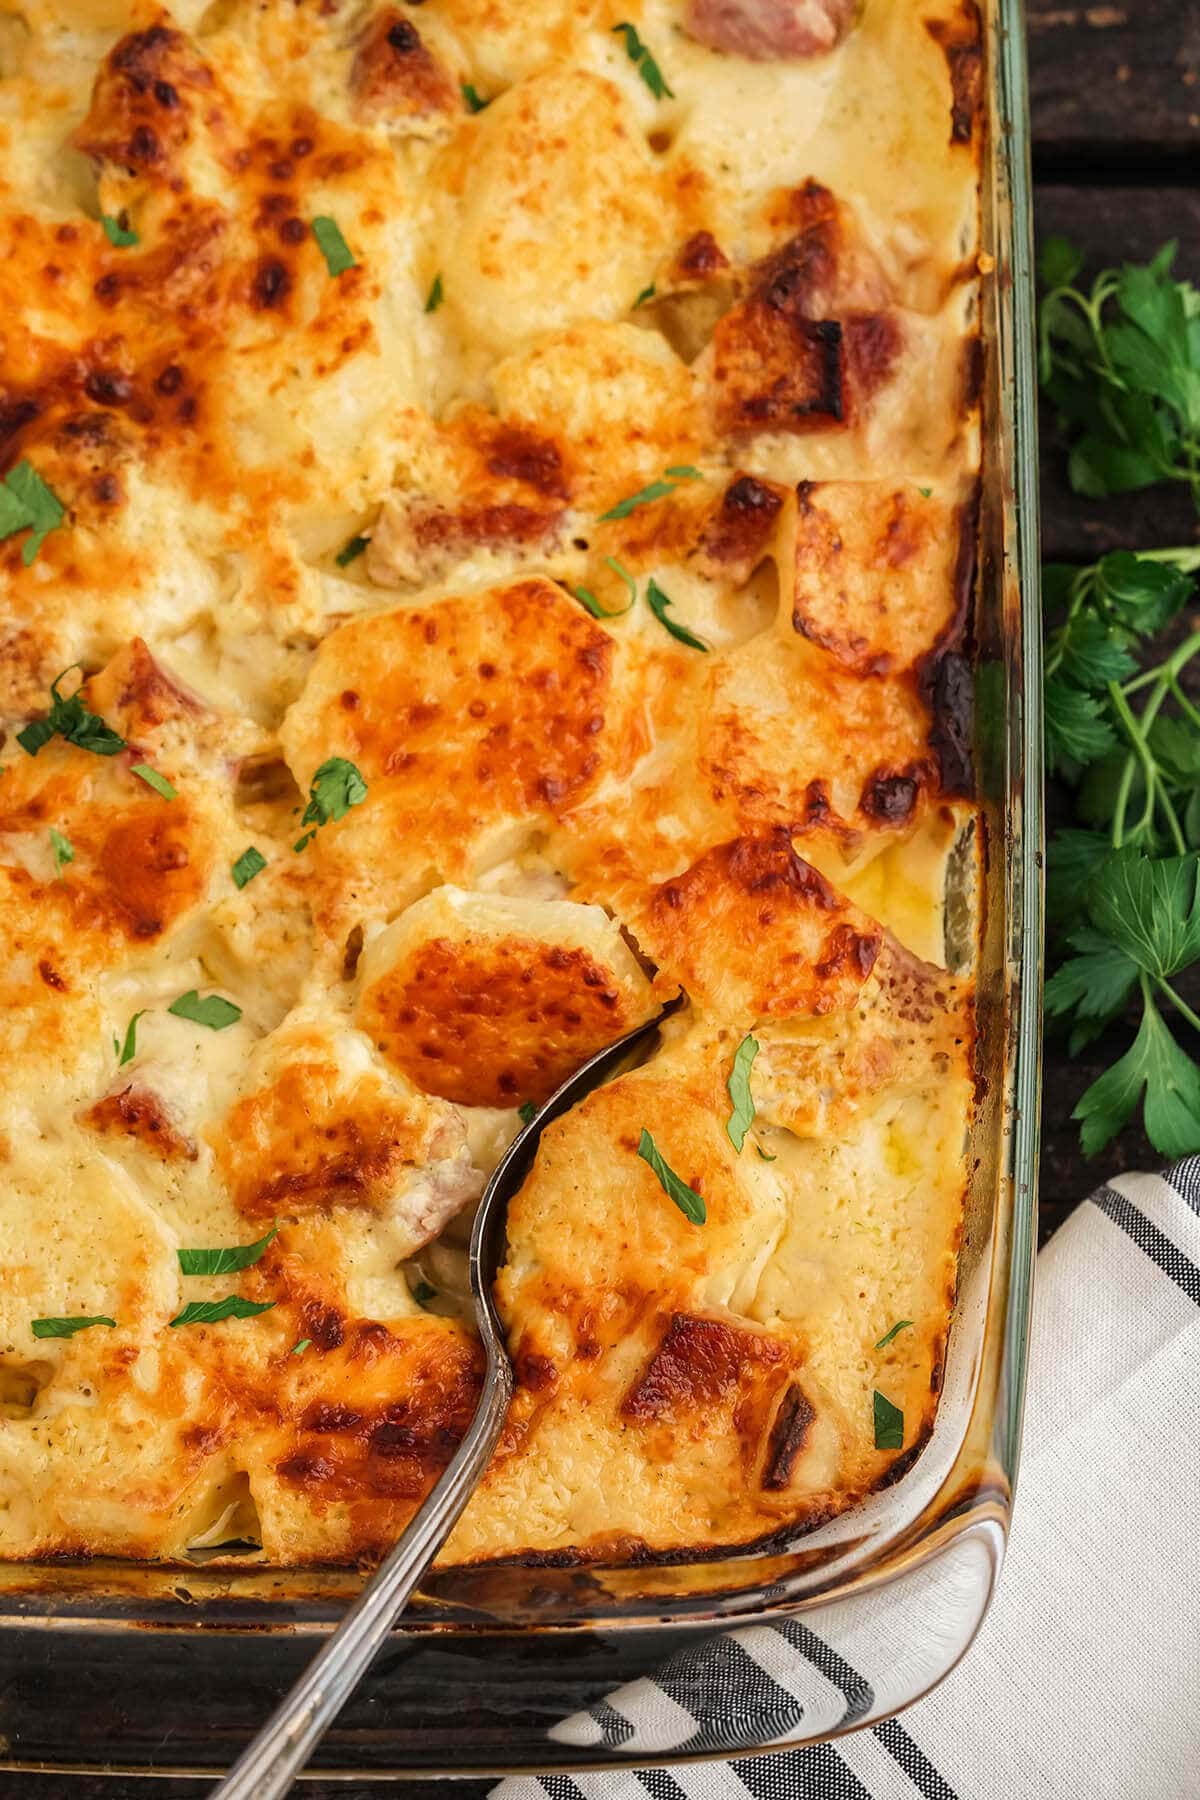 Baked ham and potato casserole with serving spoon.